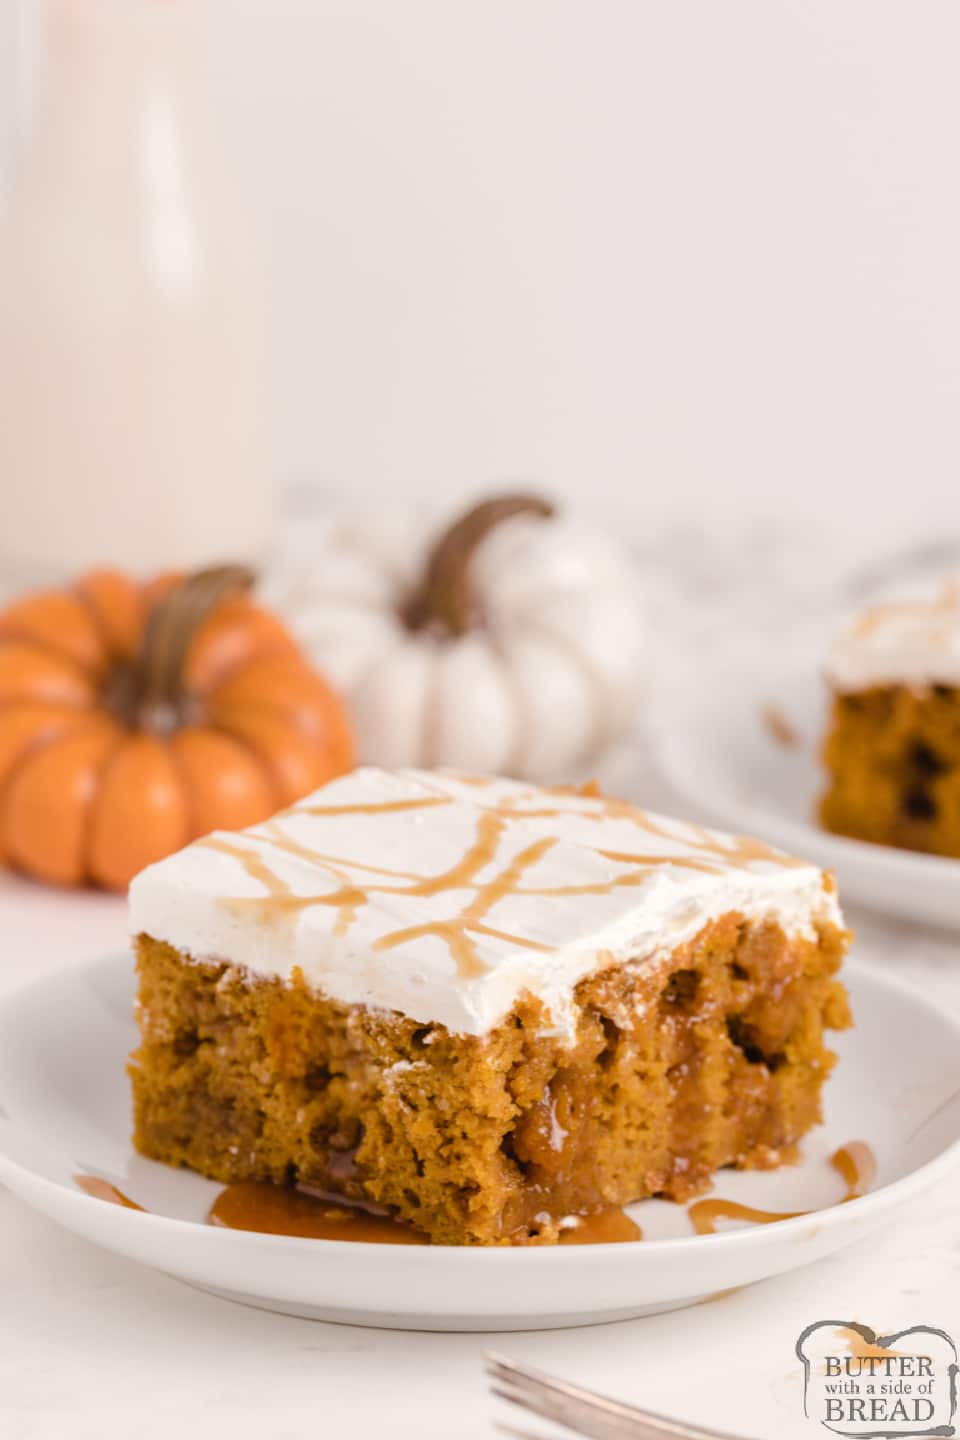 Caramel Pumpkin Poke Cake made with a cake mix, pumpkin, caramel and a simple cream frosting on top! Deliciously decadent poke cake recipe that is perfect for fall.